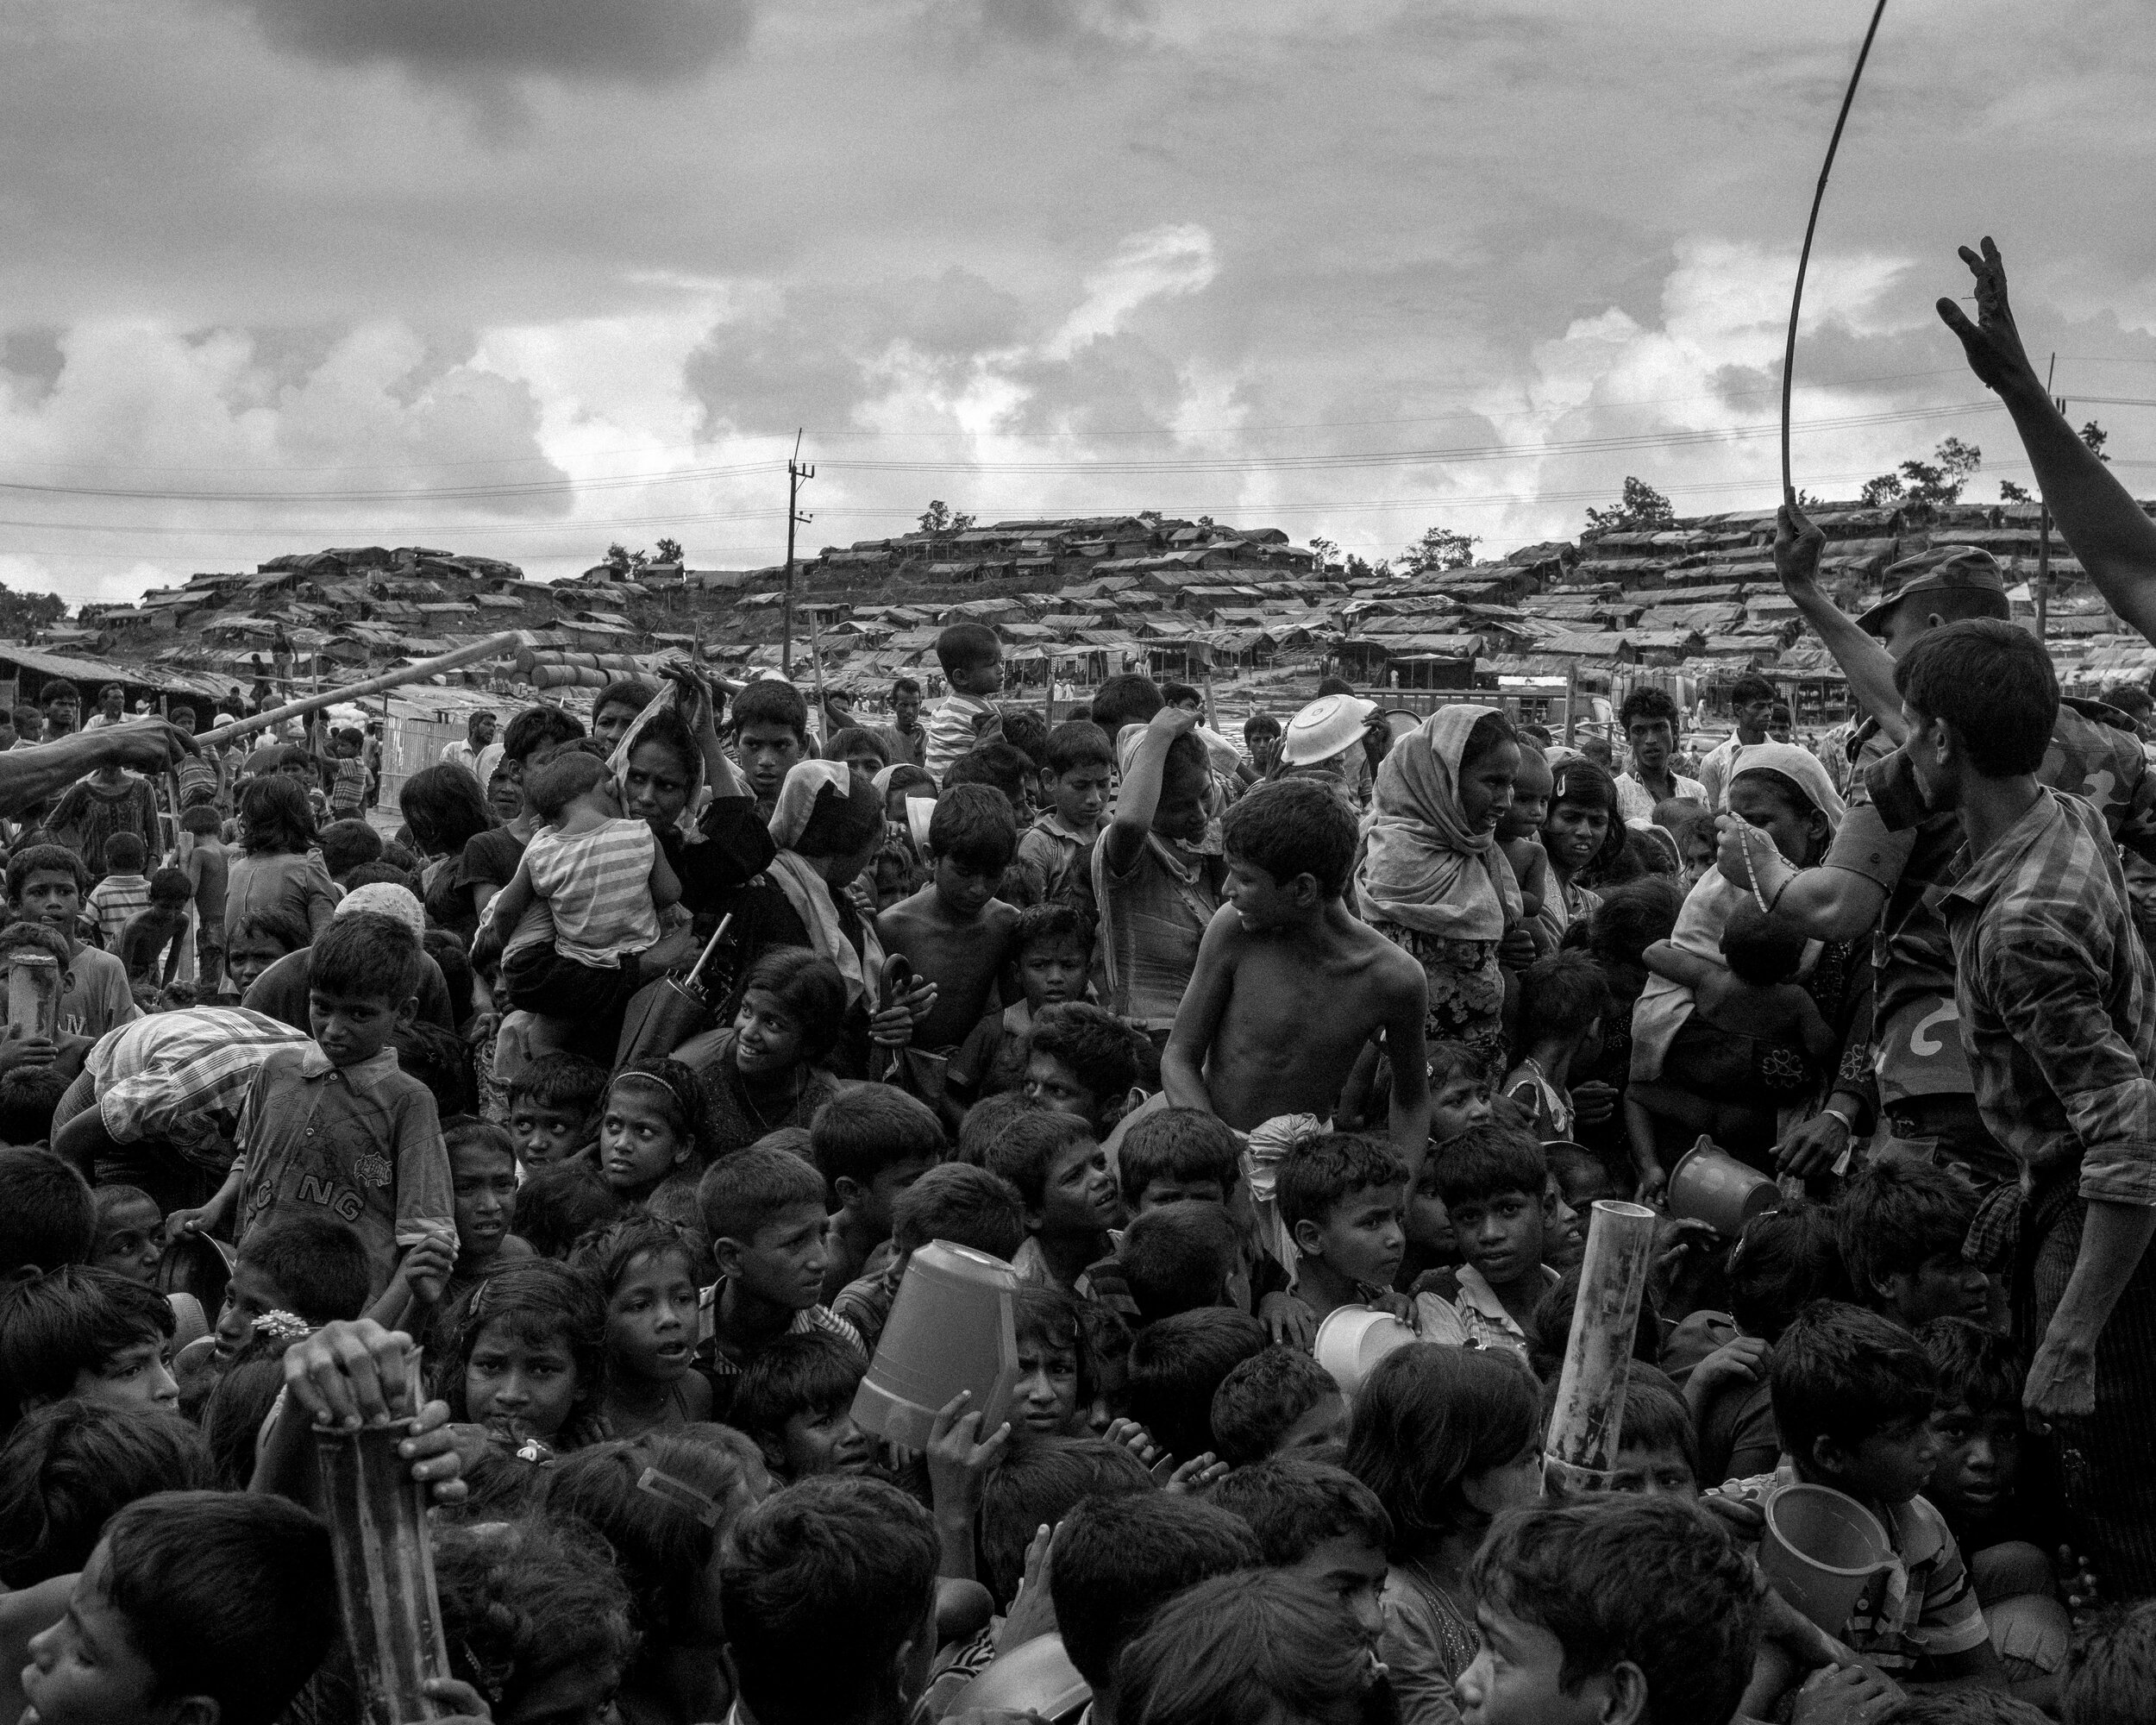   Soldiers aided by several Rohingyas try to control the distribution and try to get the crowd to sit down to calm tensions.  